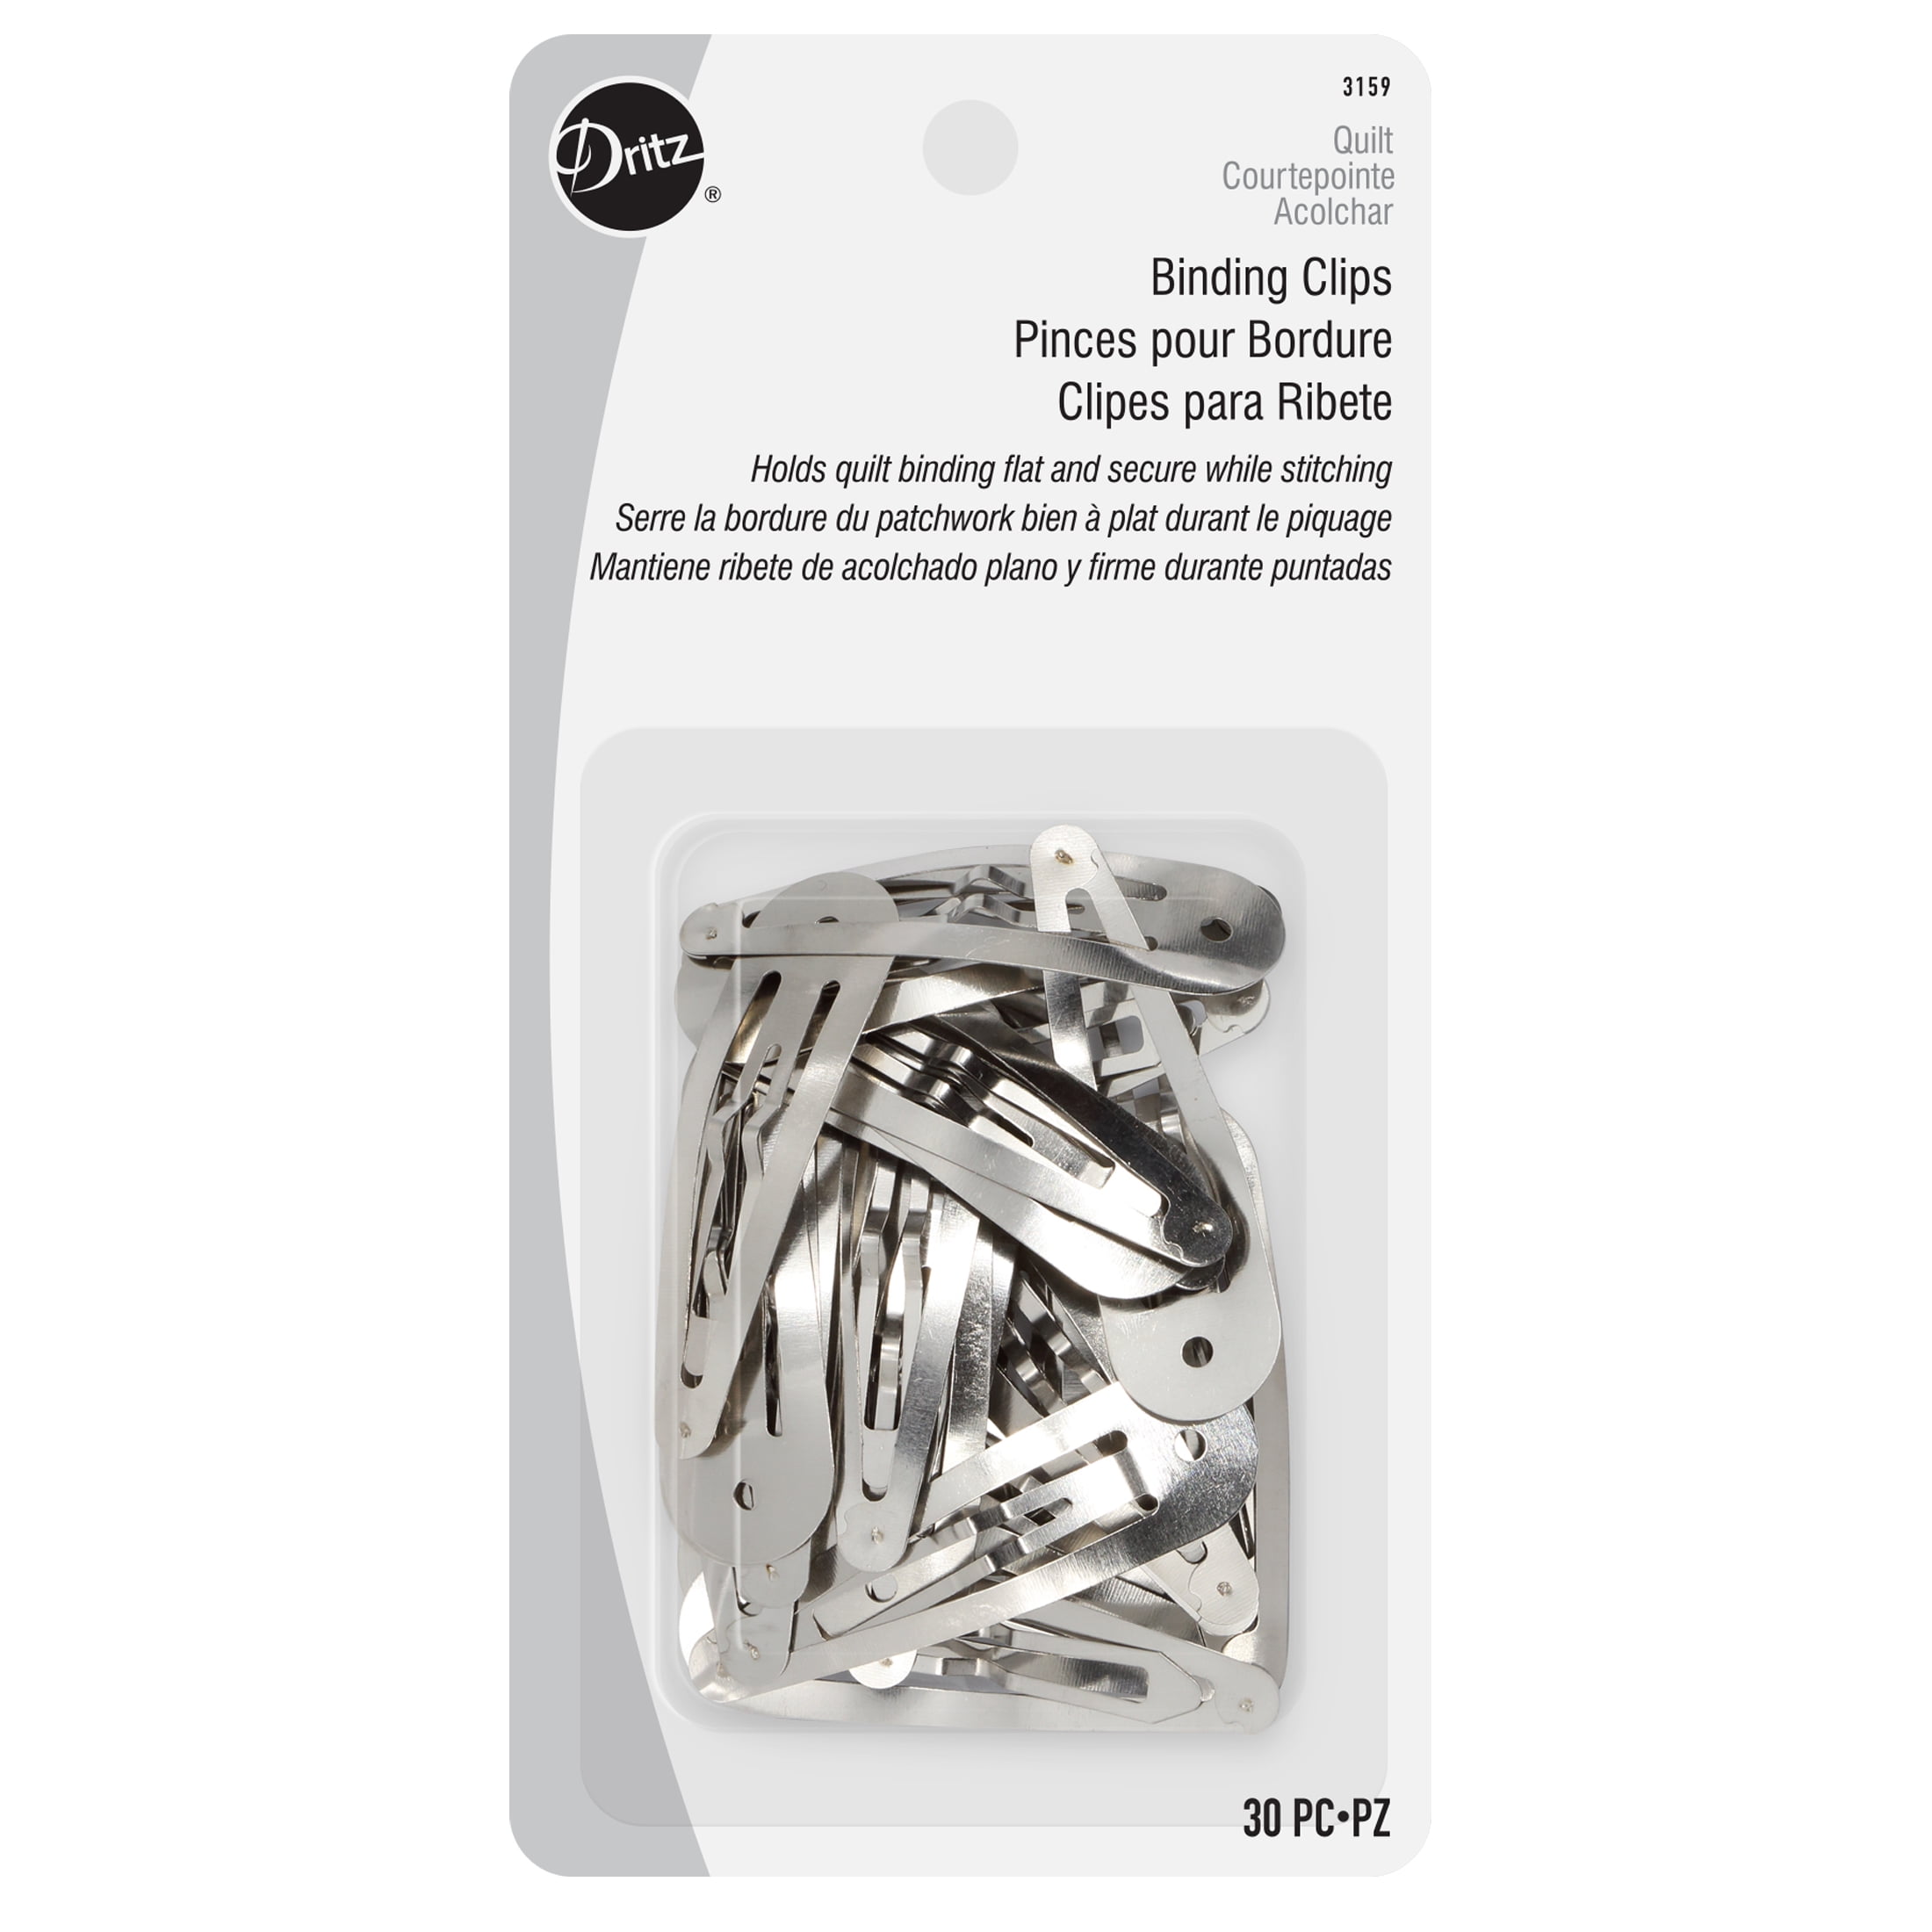 Quilters Select Quilting Clips 36pcs - 844050021505